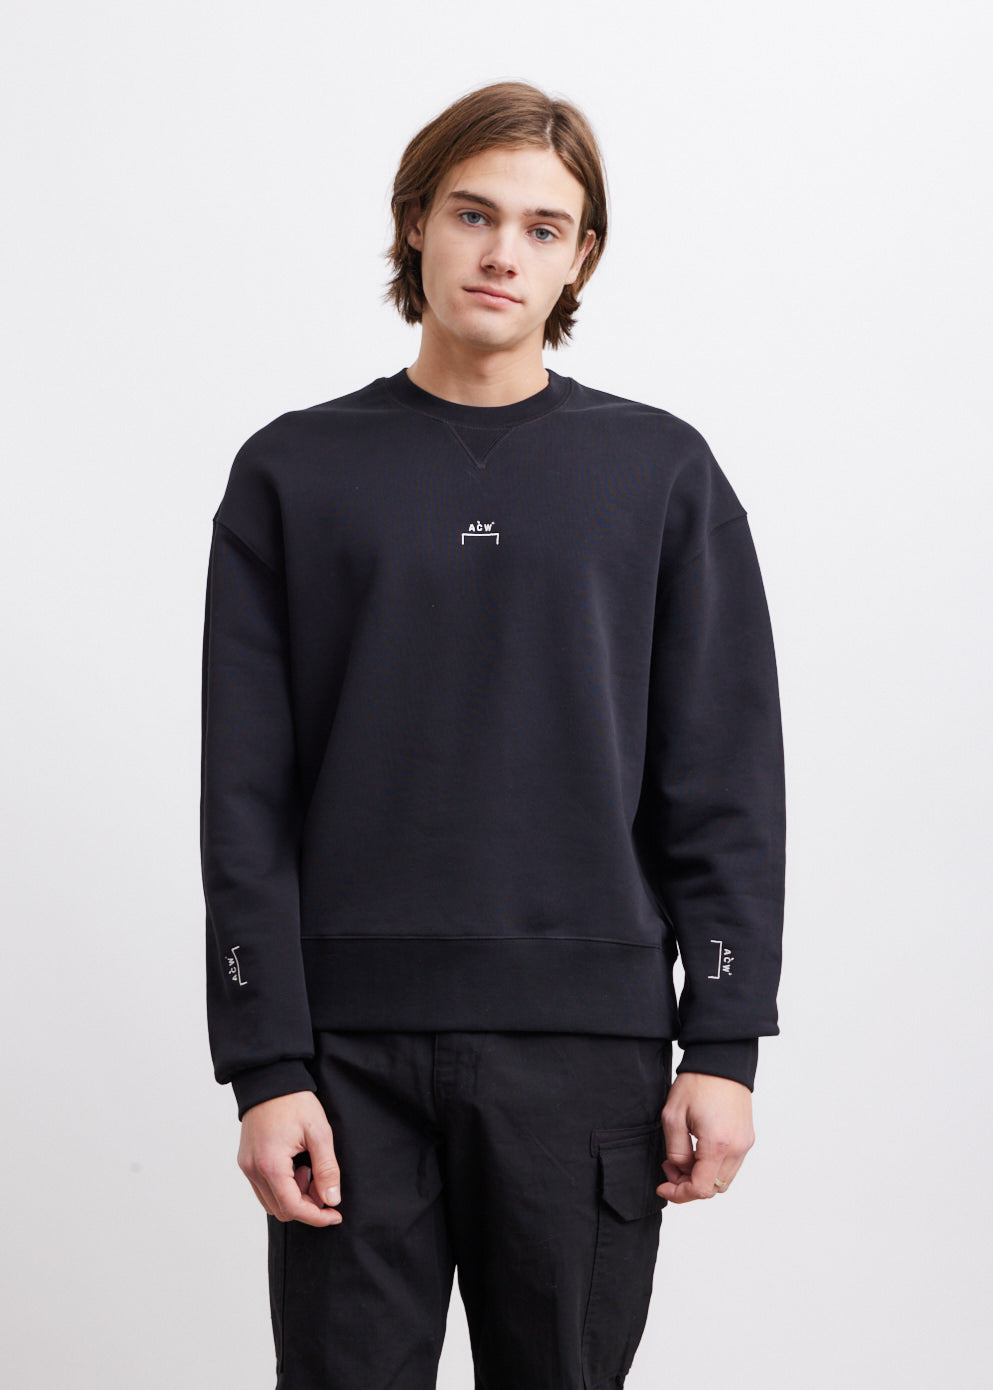 Ross Bow Long Sleeve Top in Black